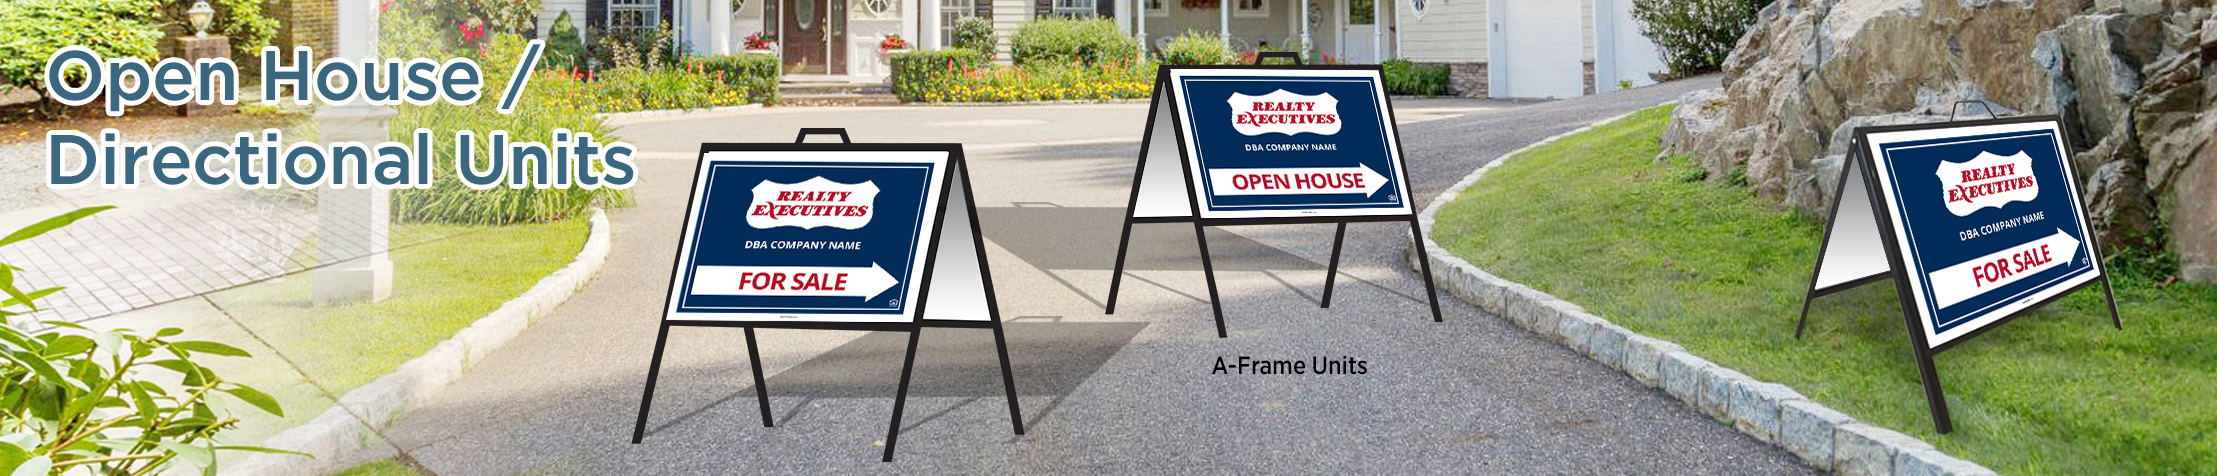 Realty Executives Real Estate Open House/Directional Units - Realty Executives directional real estate signs | BestPrintBuy.com